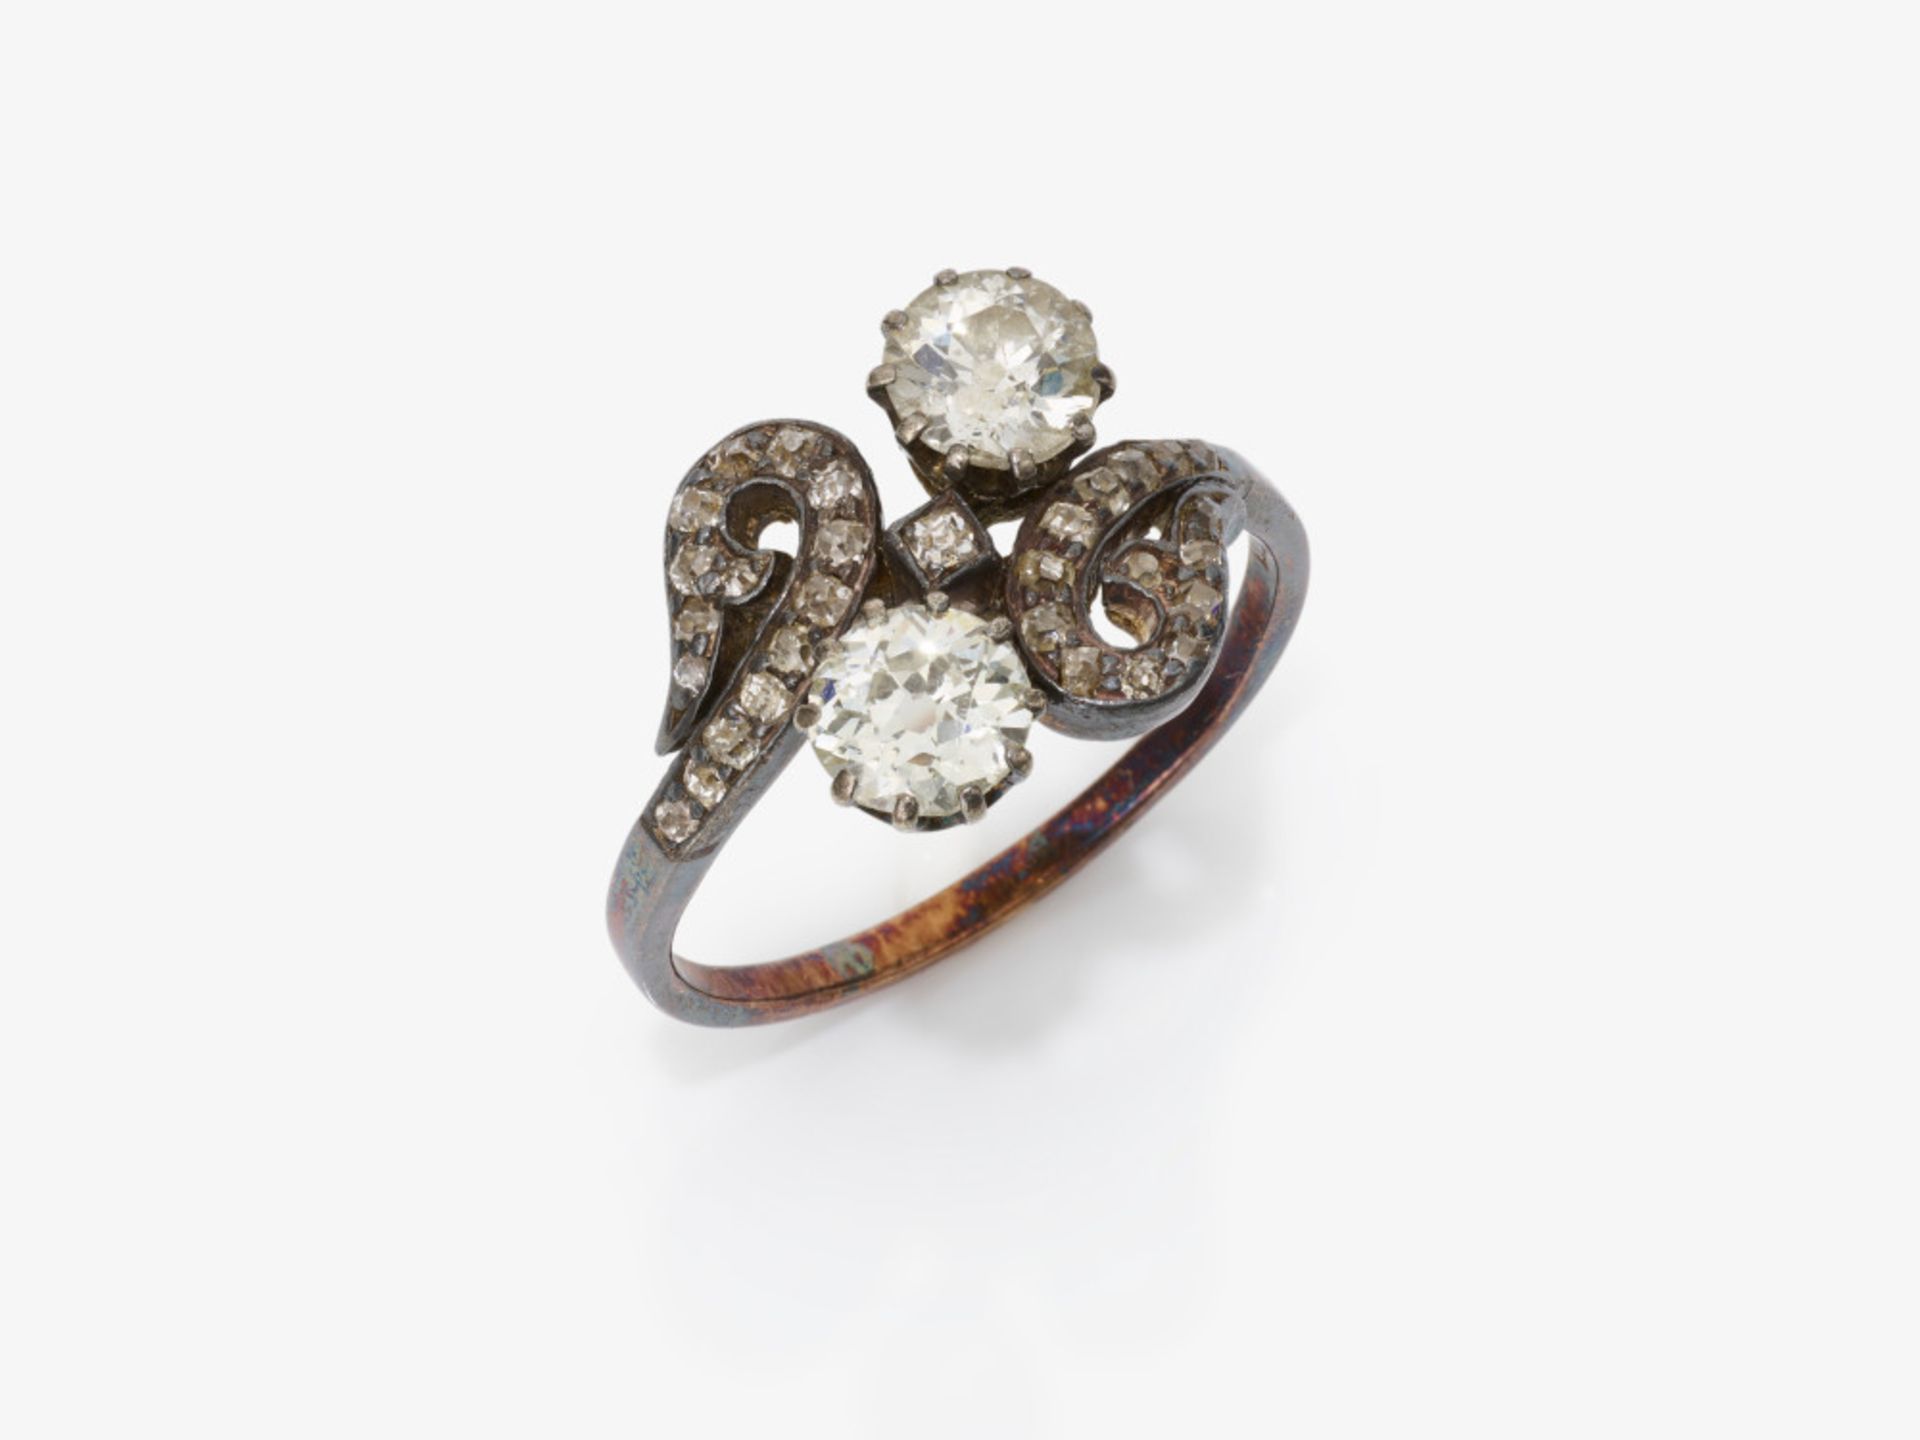 Four brooches and a ring with diamonds and pearls - Germany and Austria, late 19th/early 20th centur - Image 2 of 2